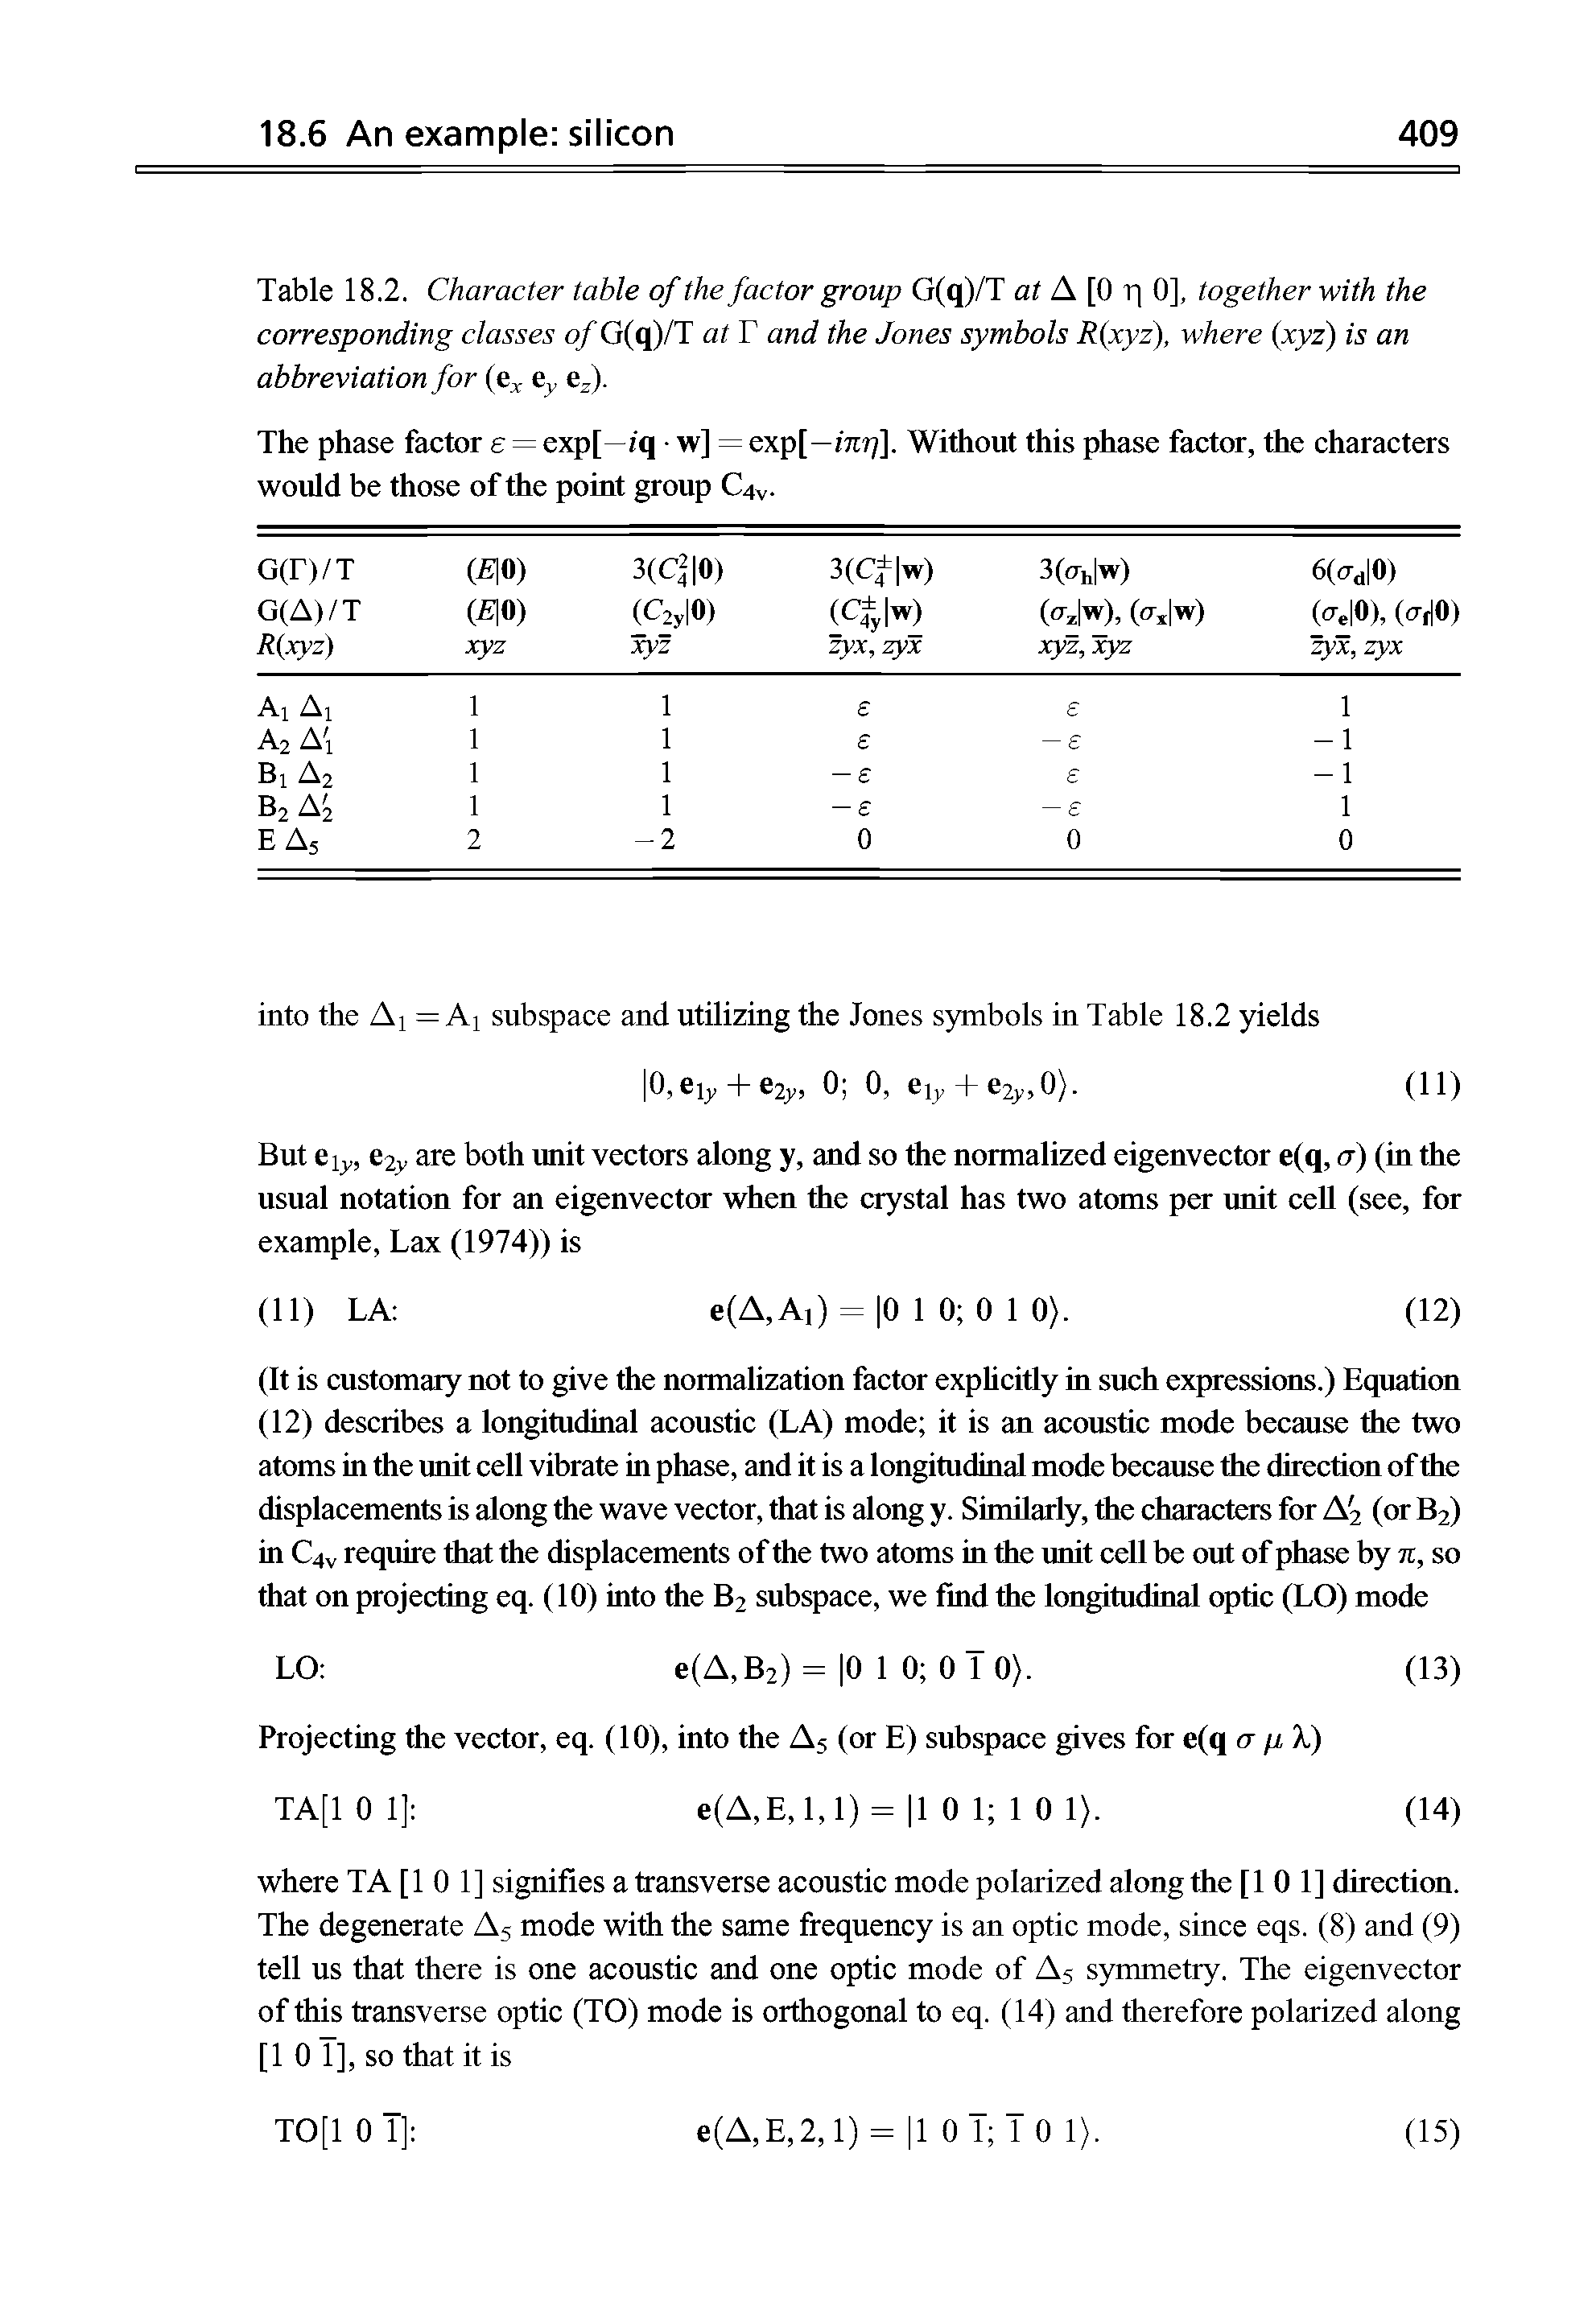 Table 18.2. Character table of the factor group G(q)/T at A [0 q 0], together with the corresponding classes of G(q)/T at T and the Jones symbols R(xyz), where (xyz) is an abbreviation for (ex ey ez).